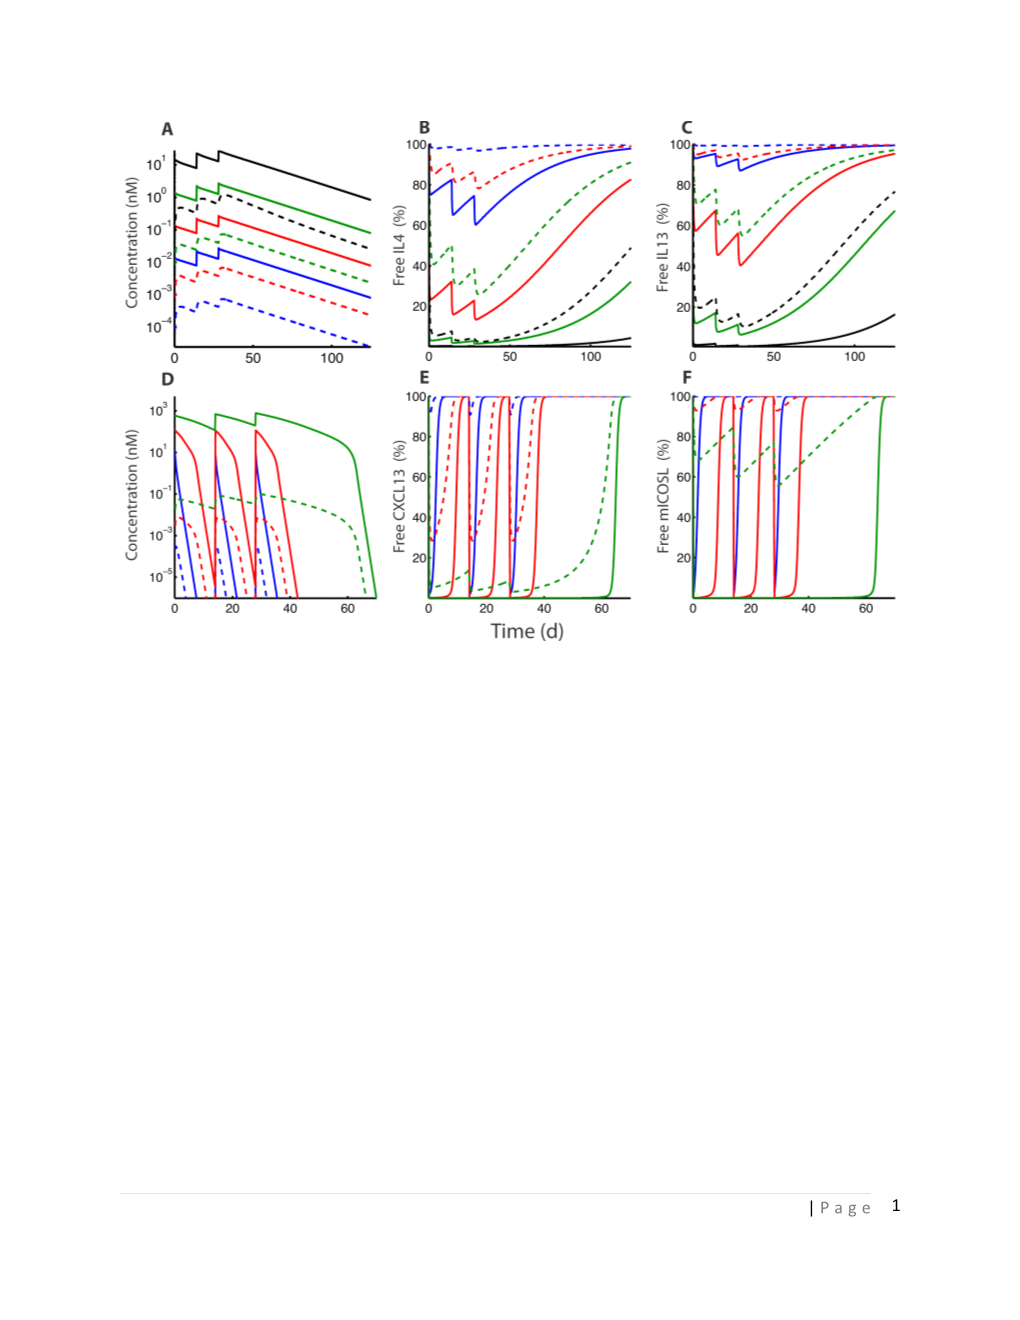 Fig.S1 Time-Course Profiles of Bispecific Antibody PK and Target Suppression After Multiple